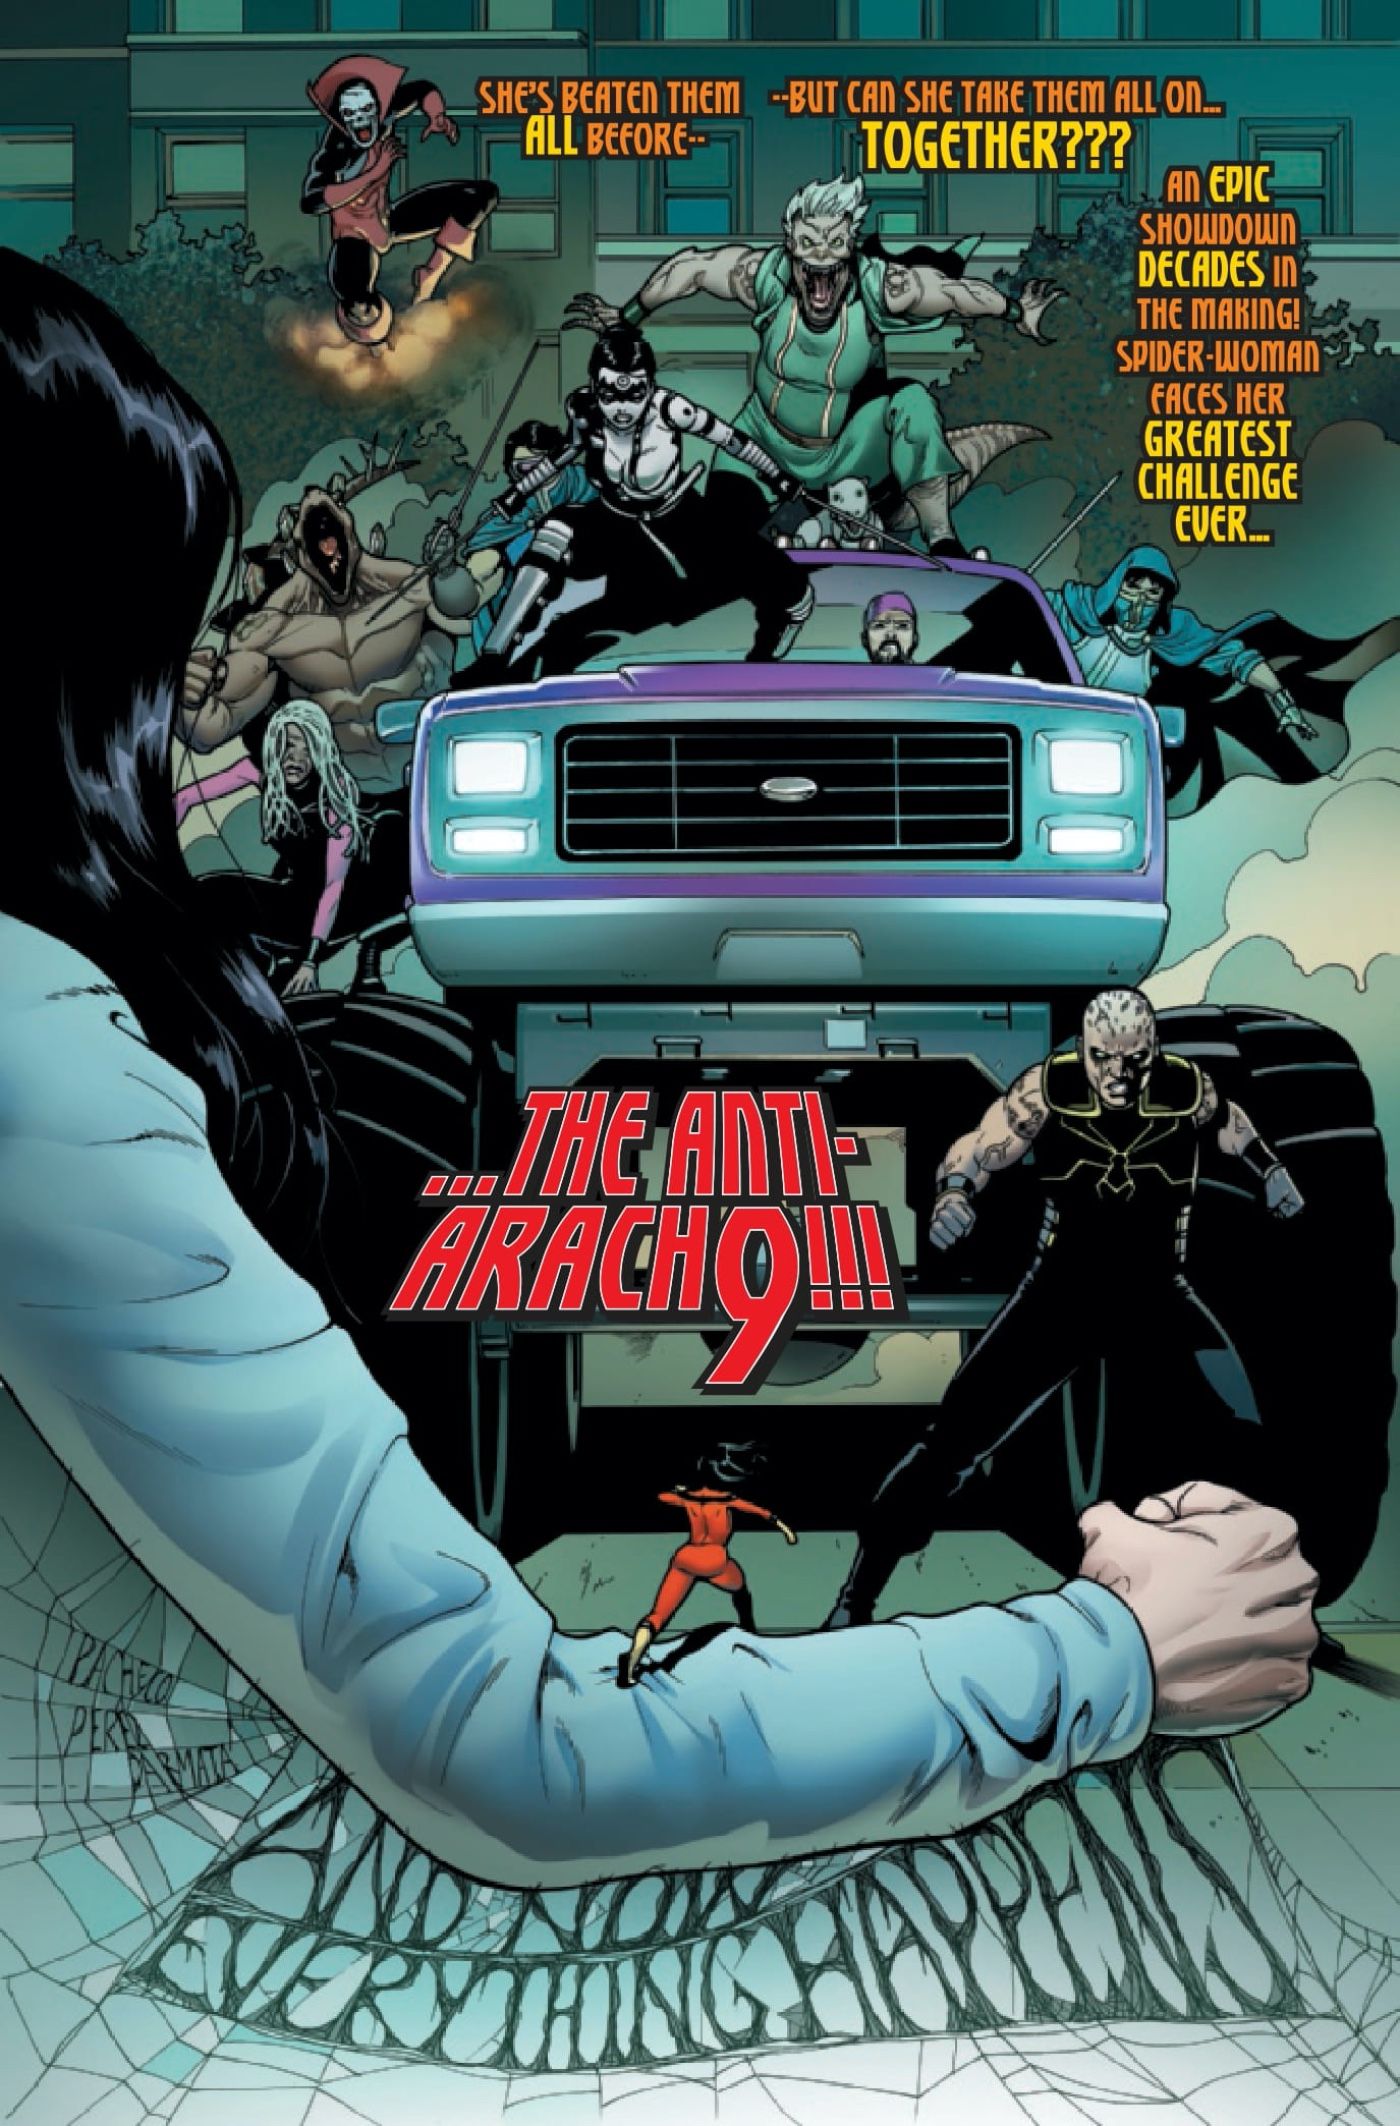 Spider-Woman confronts the Anti-Arach9